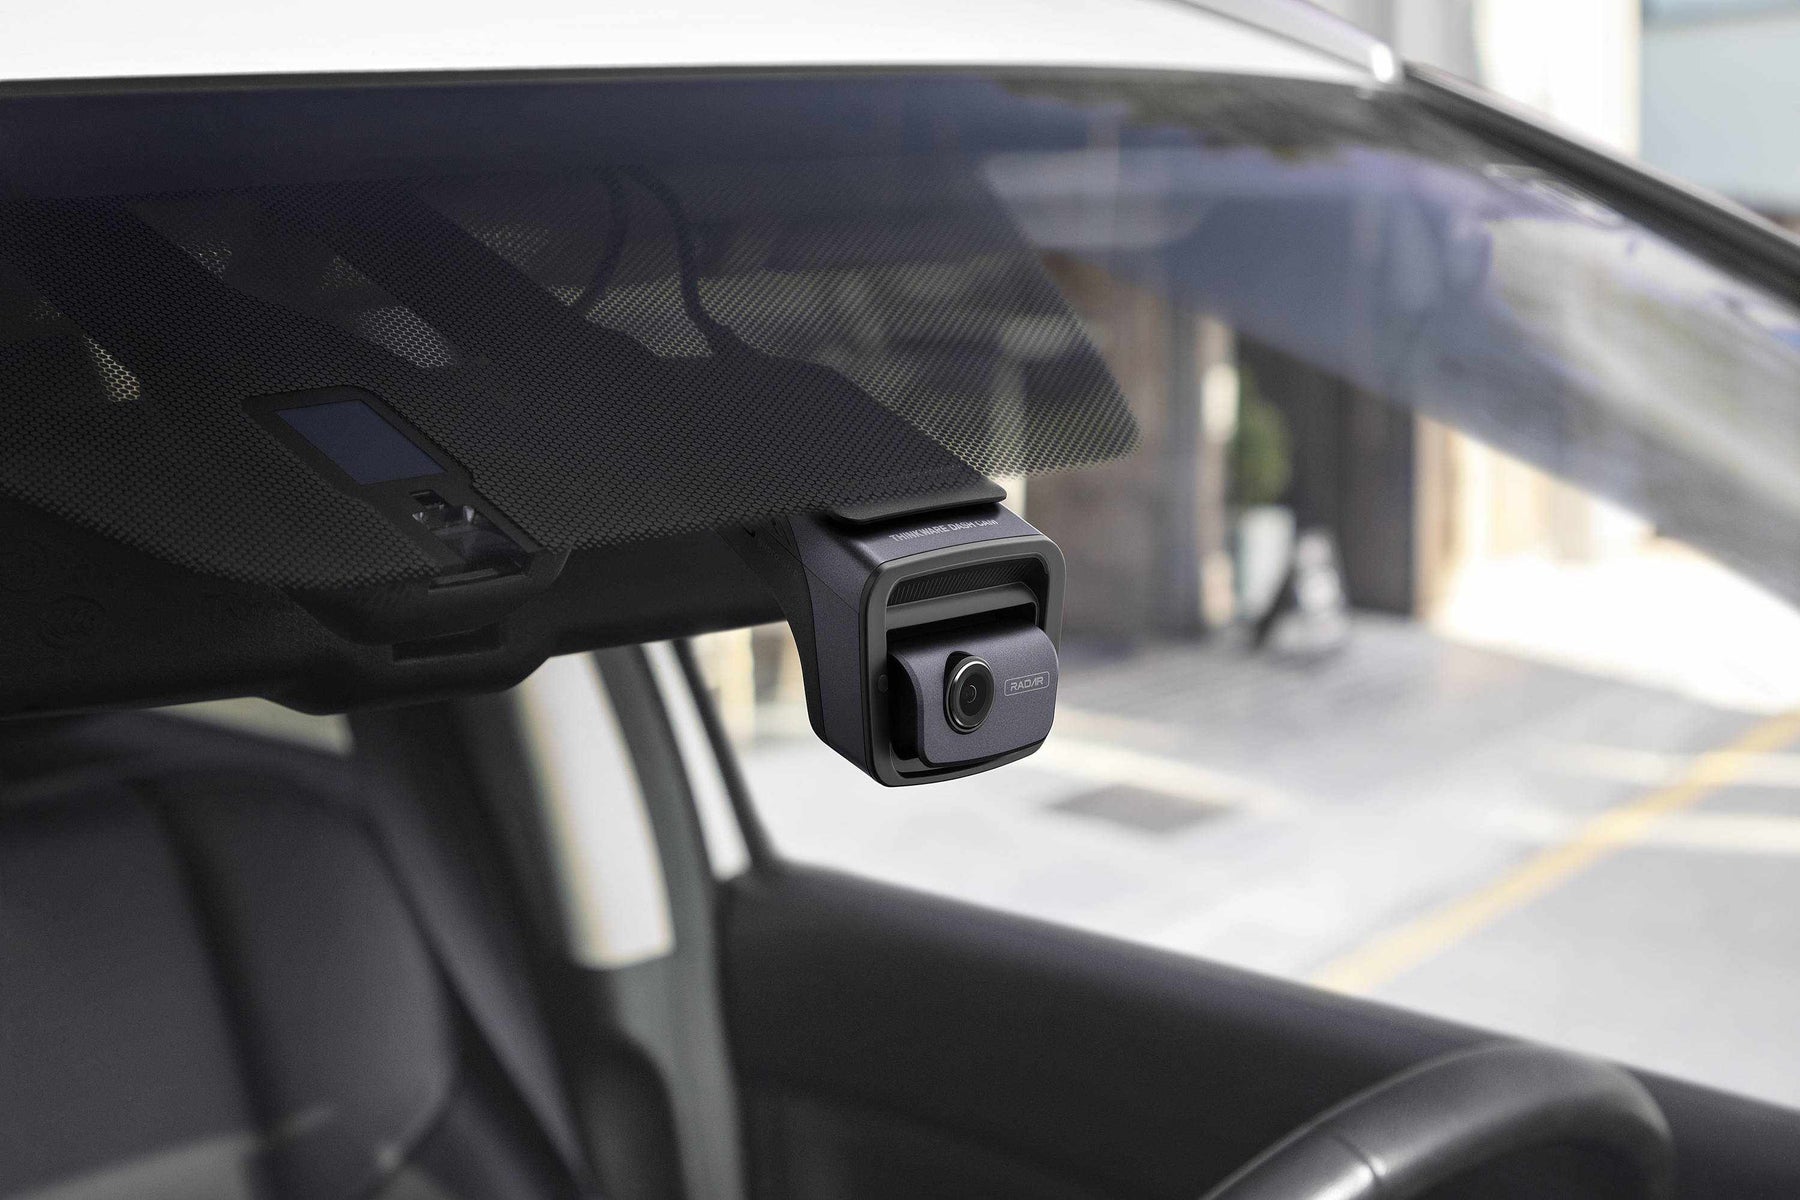 Does the Thinkware U3000 4K dash cam have what it takes to revolutionize the industry again?